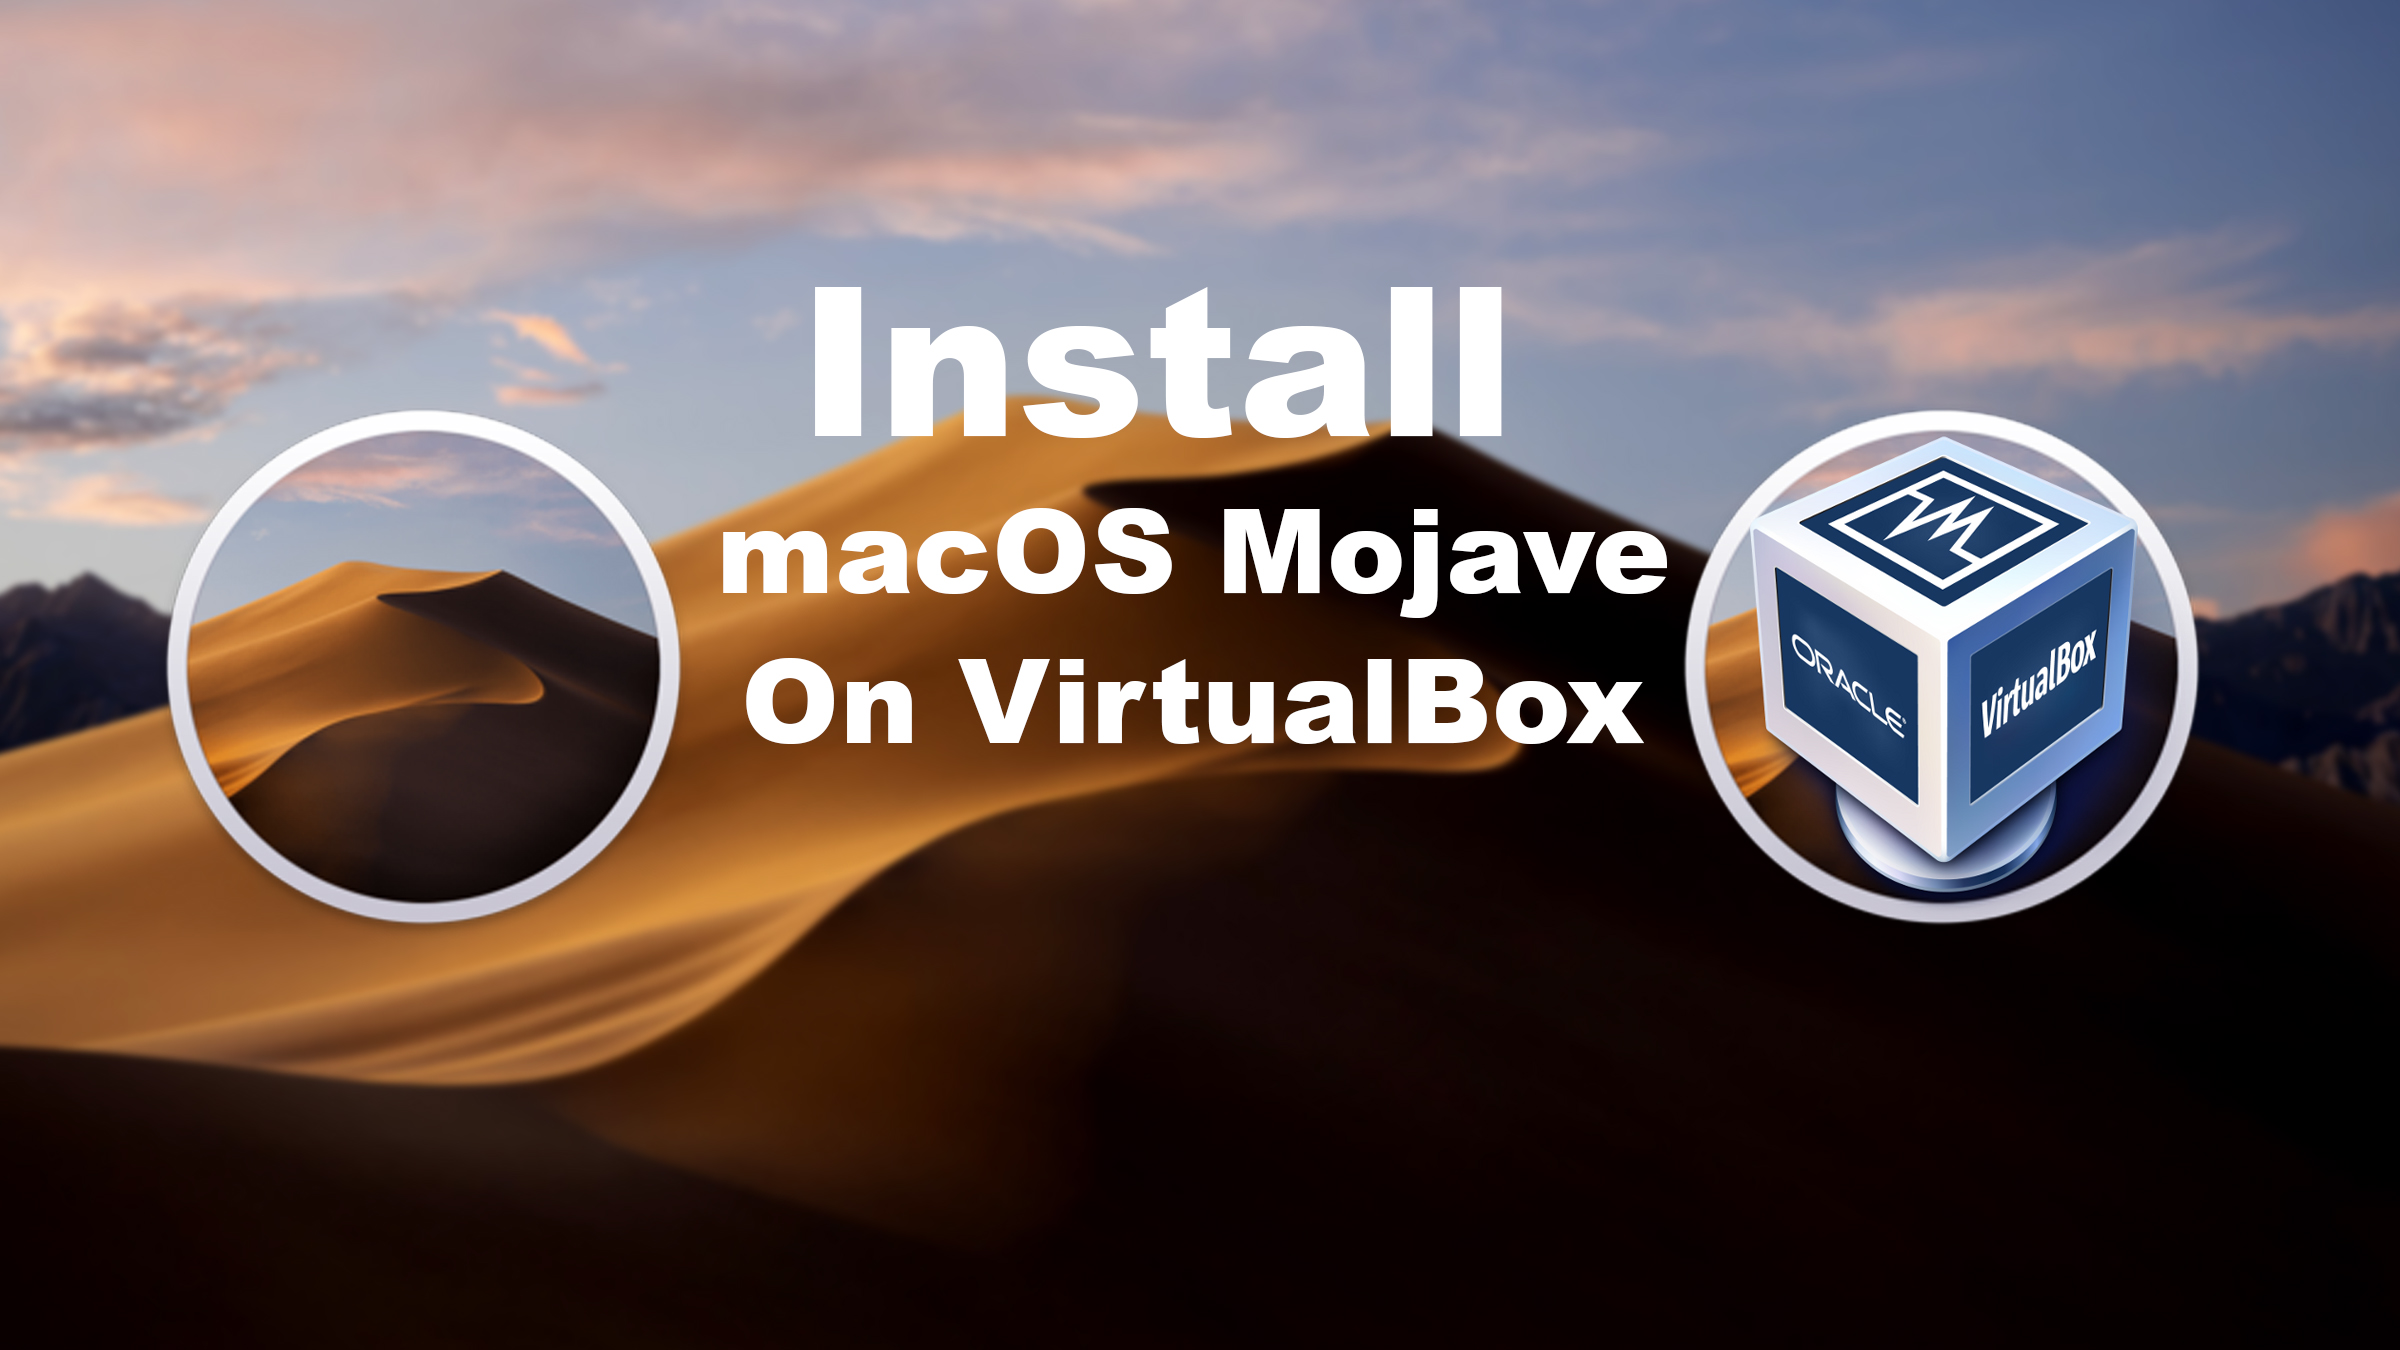 macos mojave operating systems